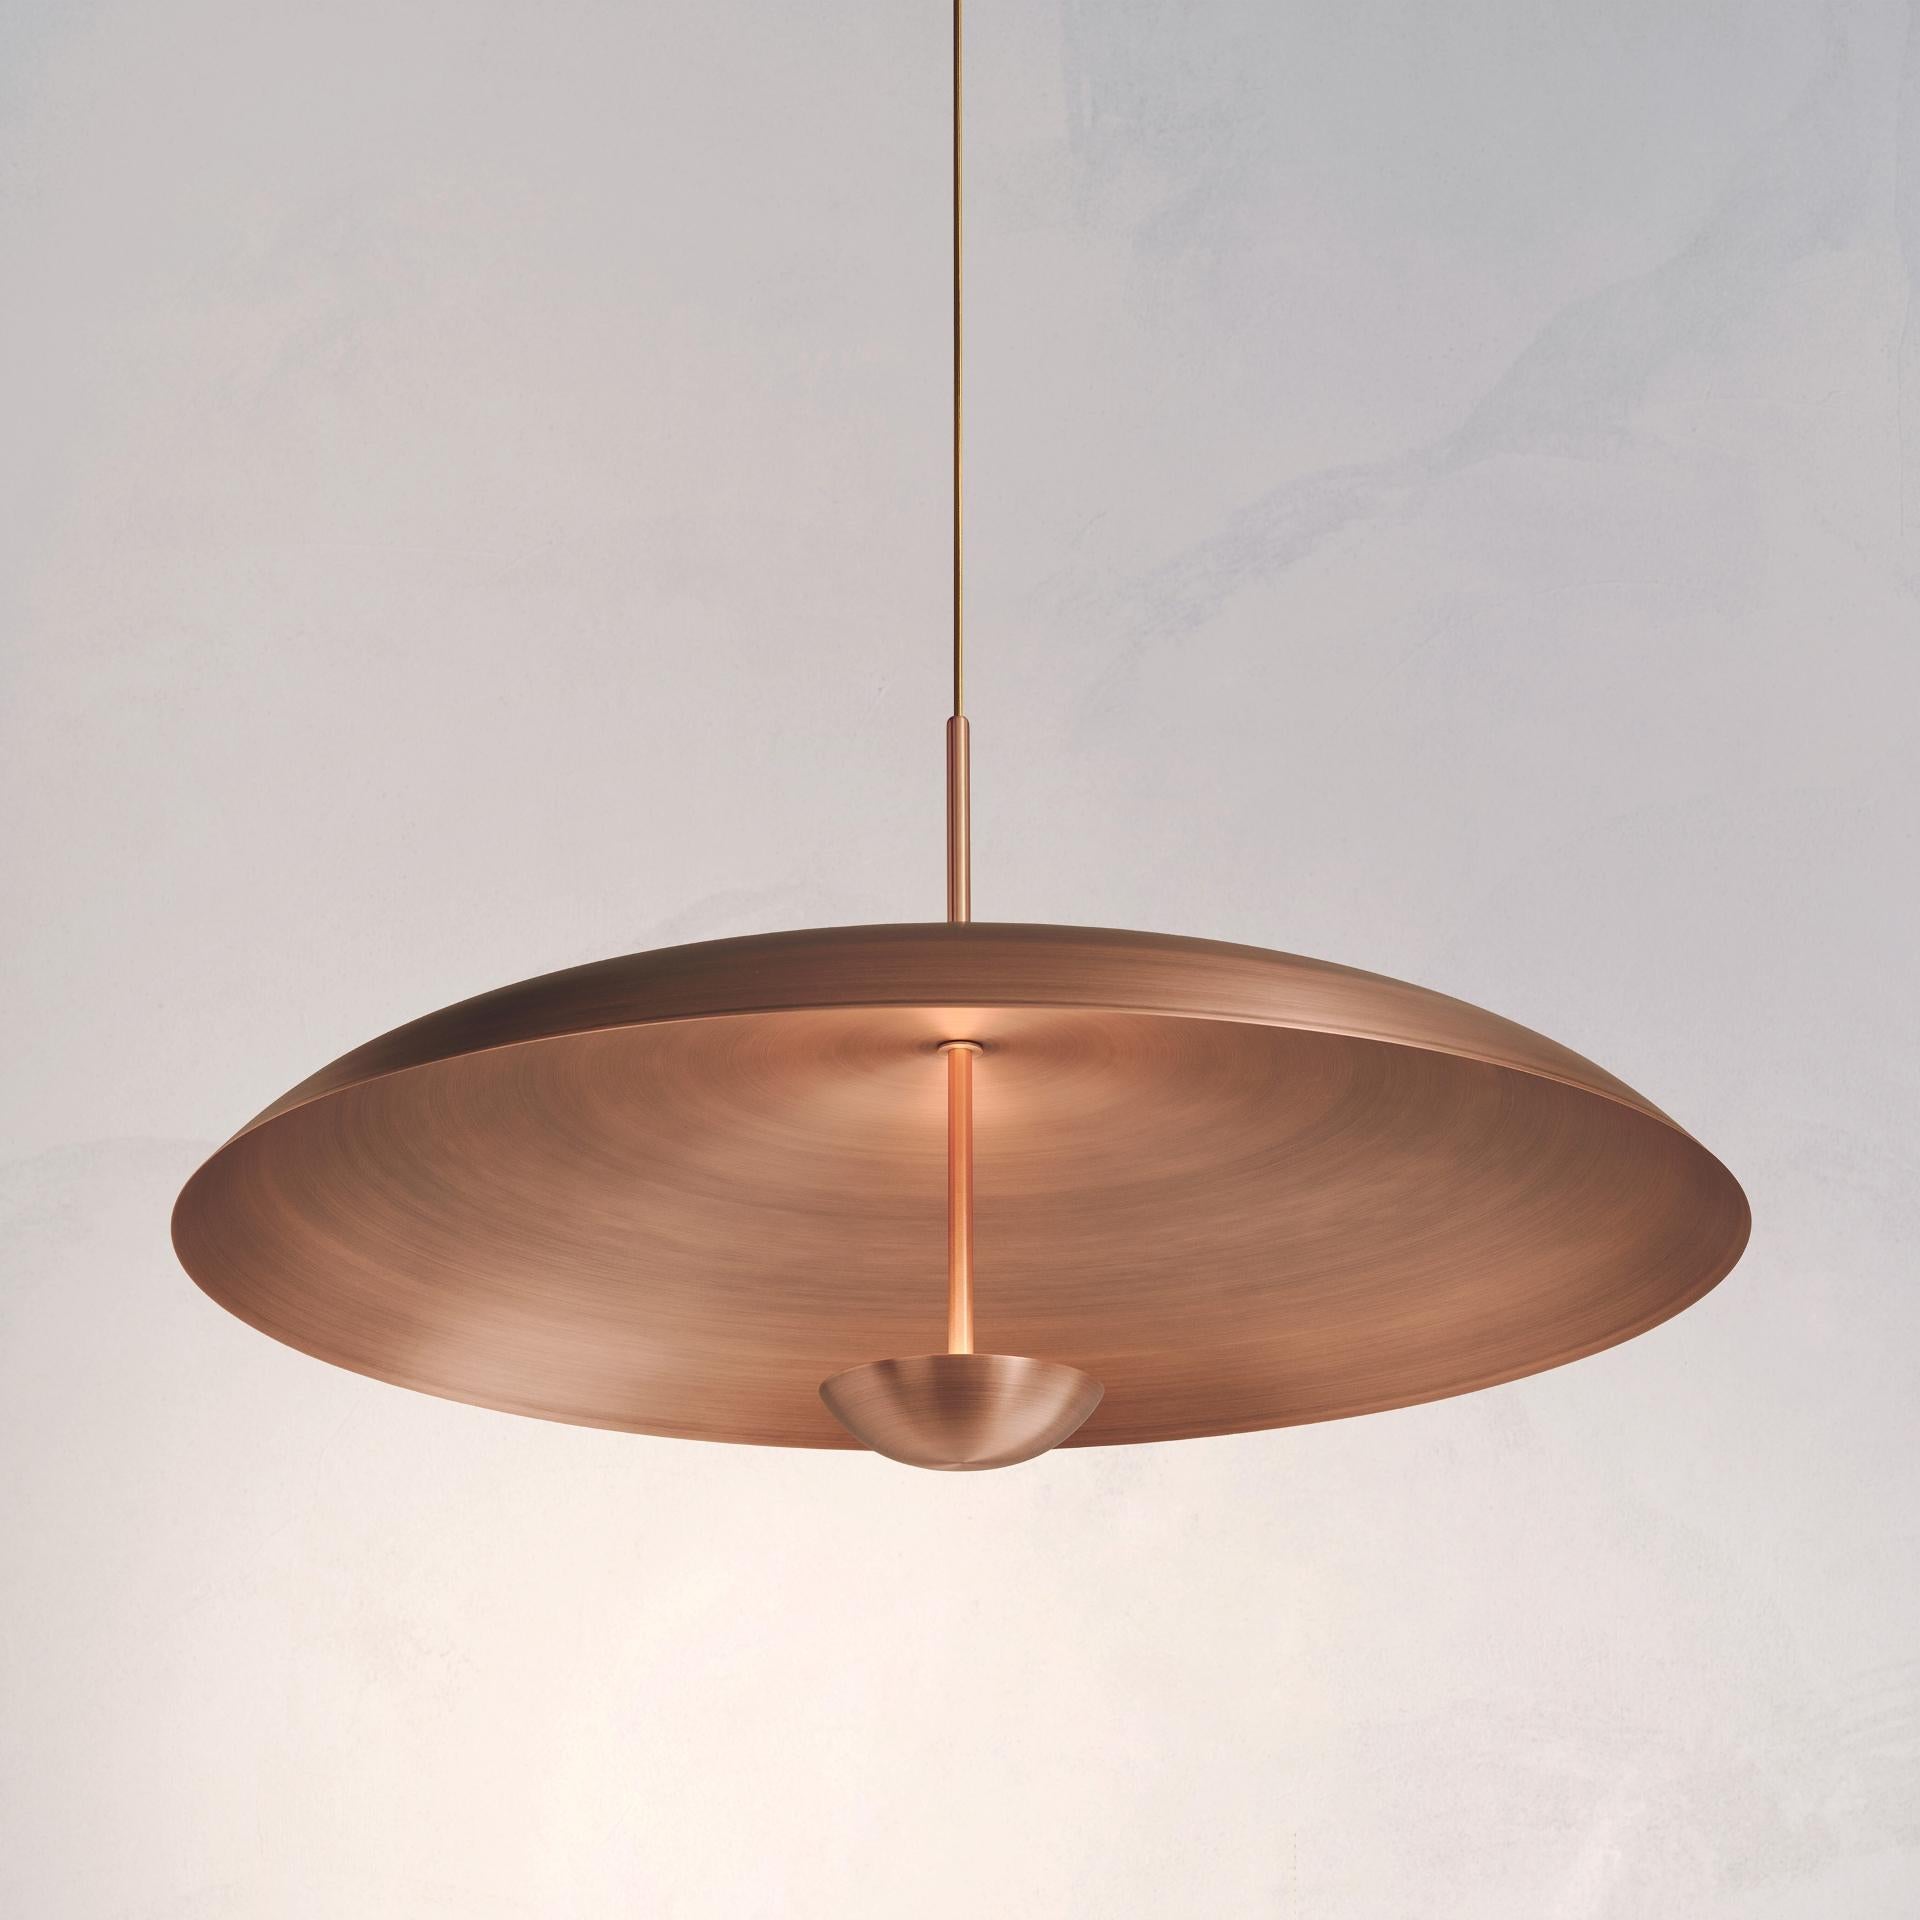 Two finely hand-spun copper plates make up this pendant light,  finished in a bronze patina to create this unique appearance. The light is projected into the shade and reflects out, illuminating without creating a glare.
 
This light fixture is